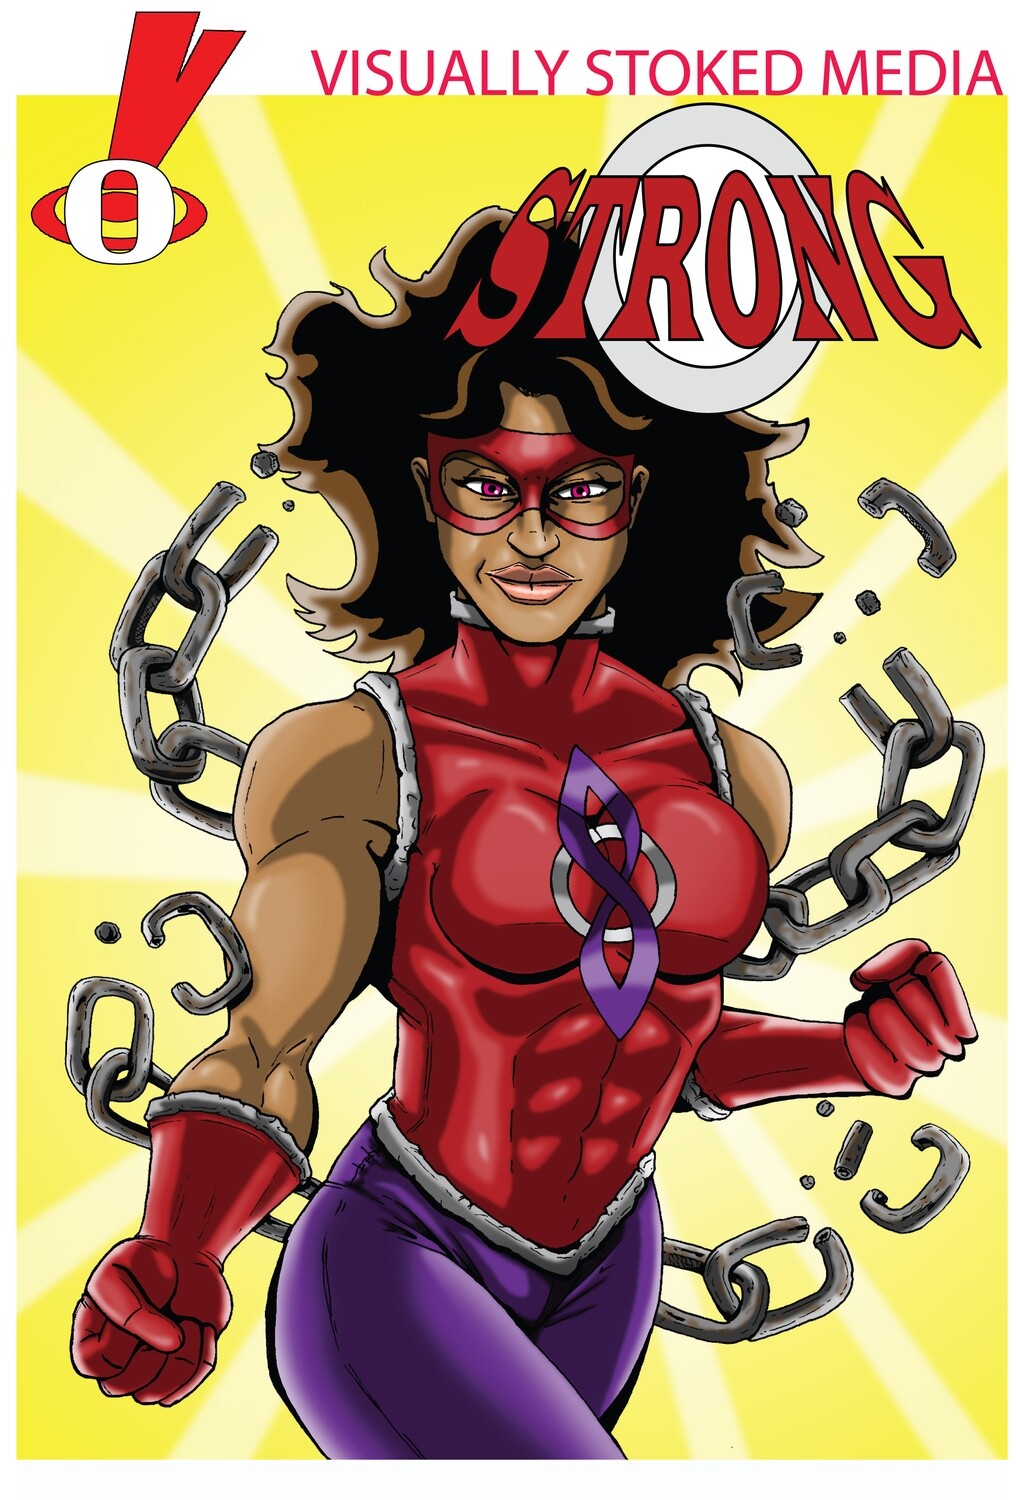 STRONG #0 (One-Shot)